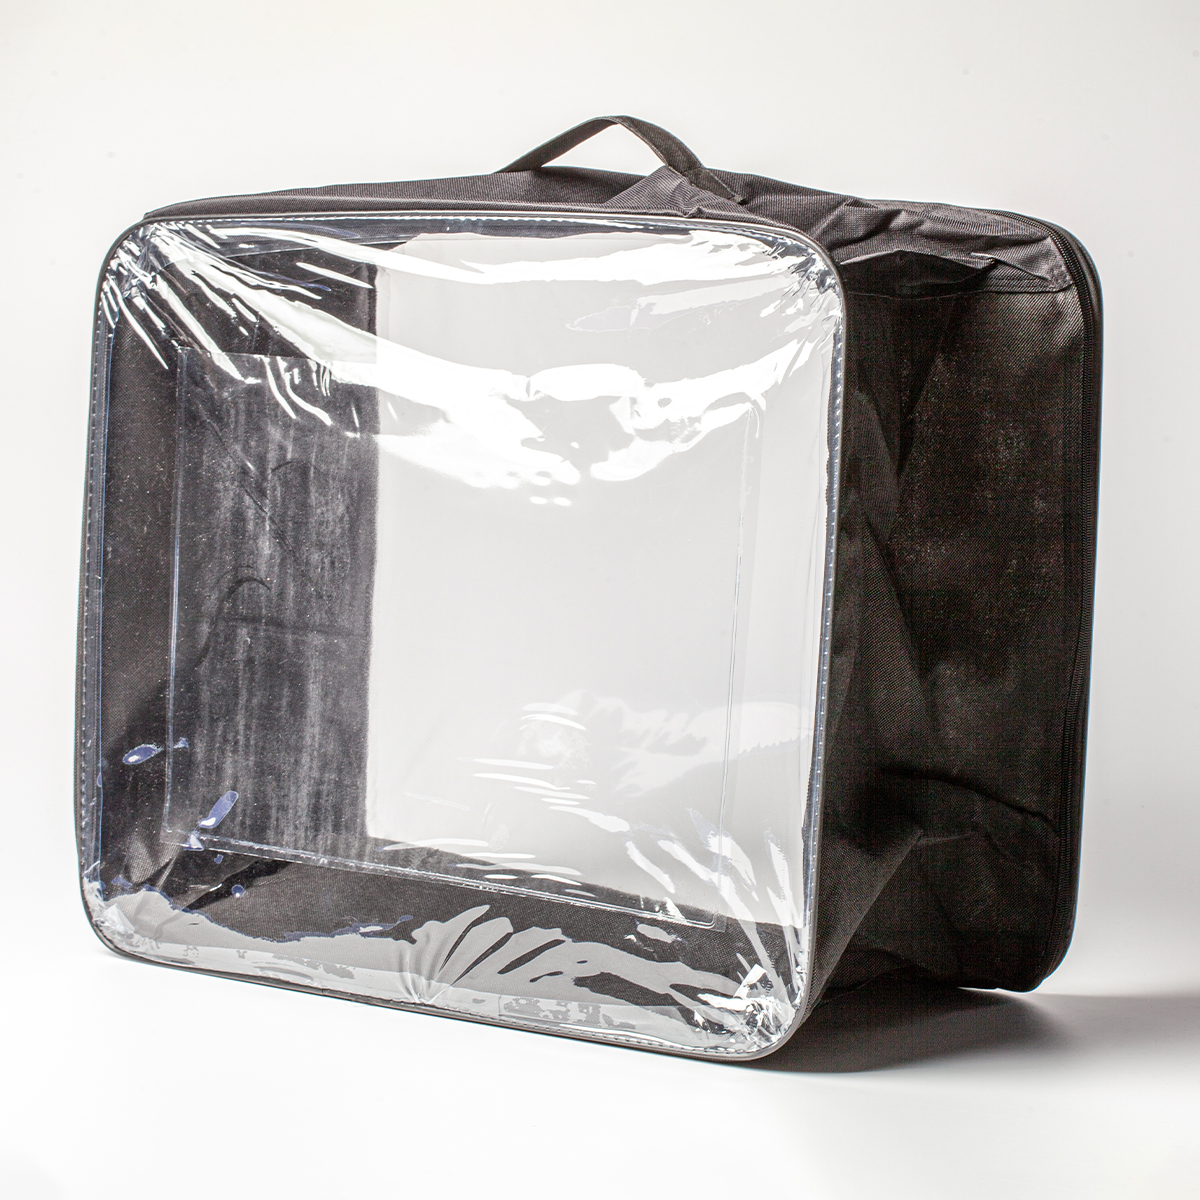 Bedspread Storage Bag - Vendella - Specialists in Hospitality Products